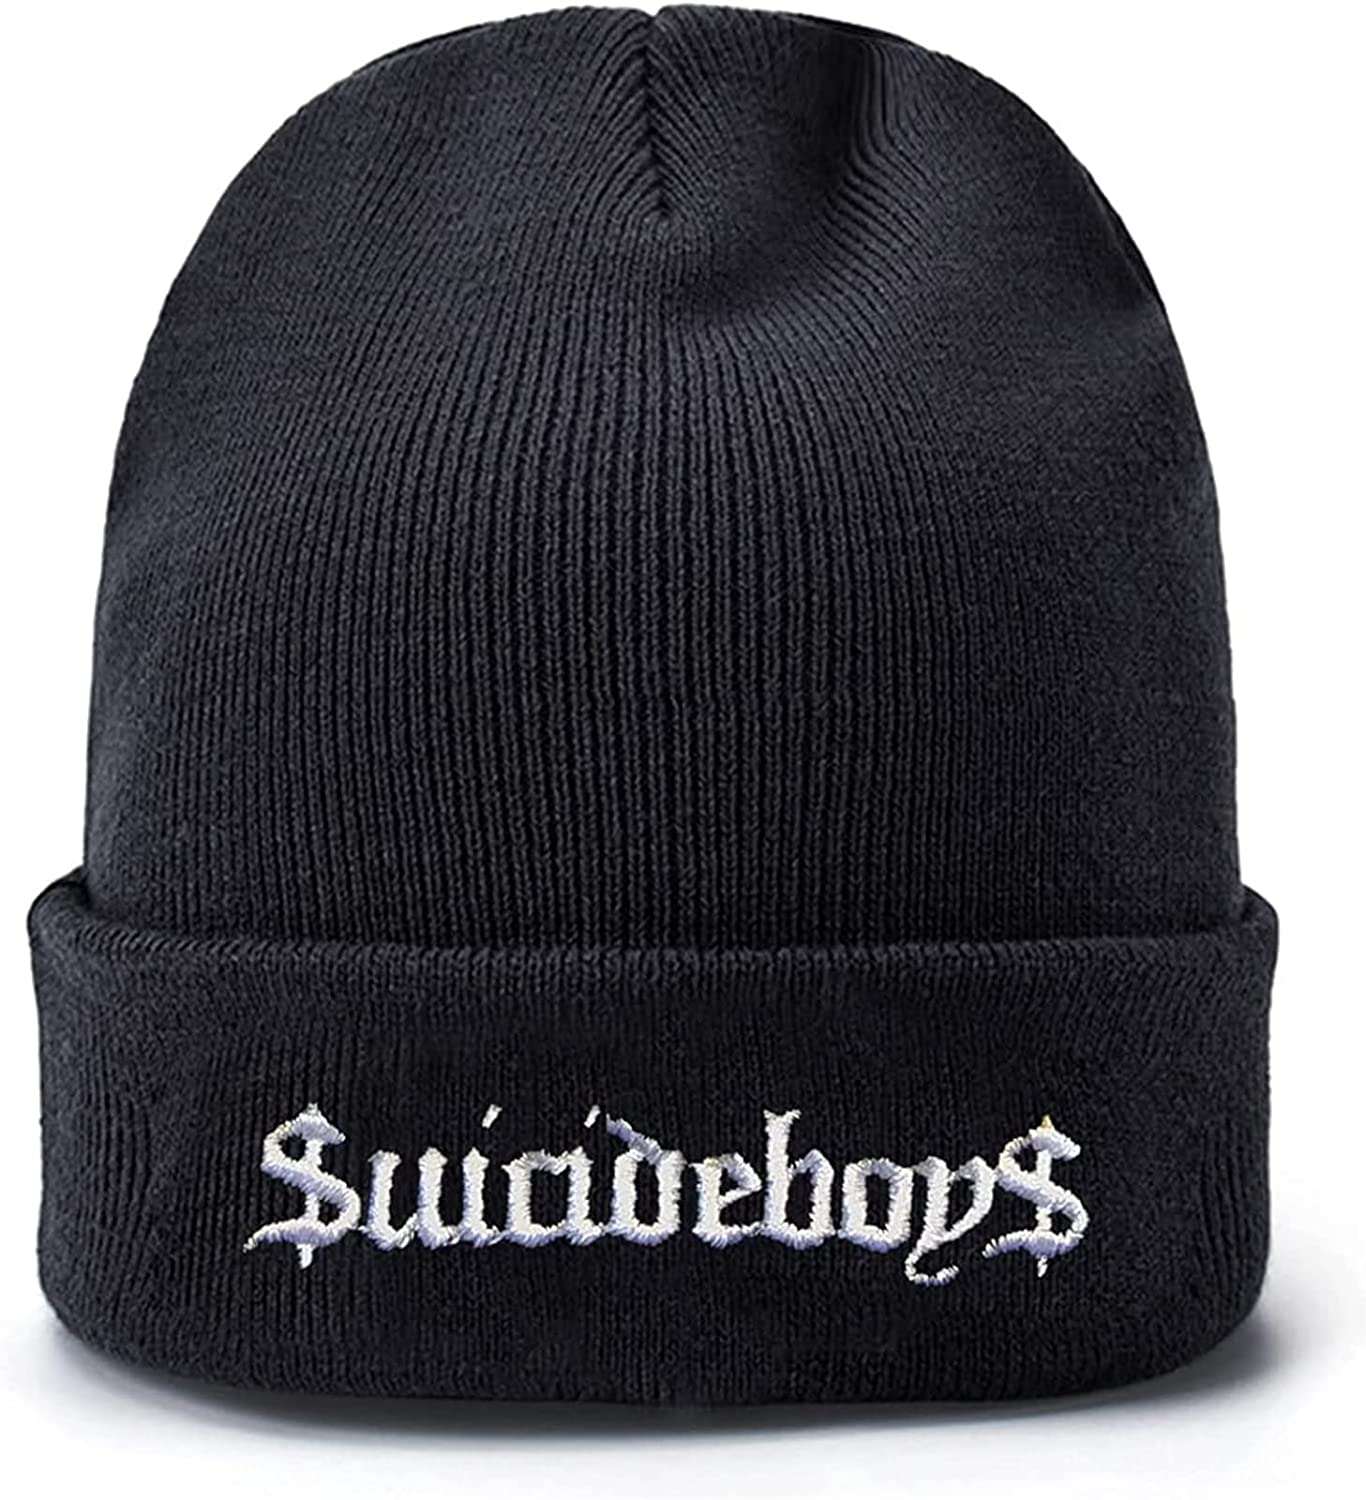 gogoherhome Suicide Logo Boys Knit Hats Beanie for Men Women Warm  Embroidered Soft Stretchy Toboggan Cap for Cold Weather Black